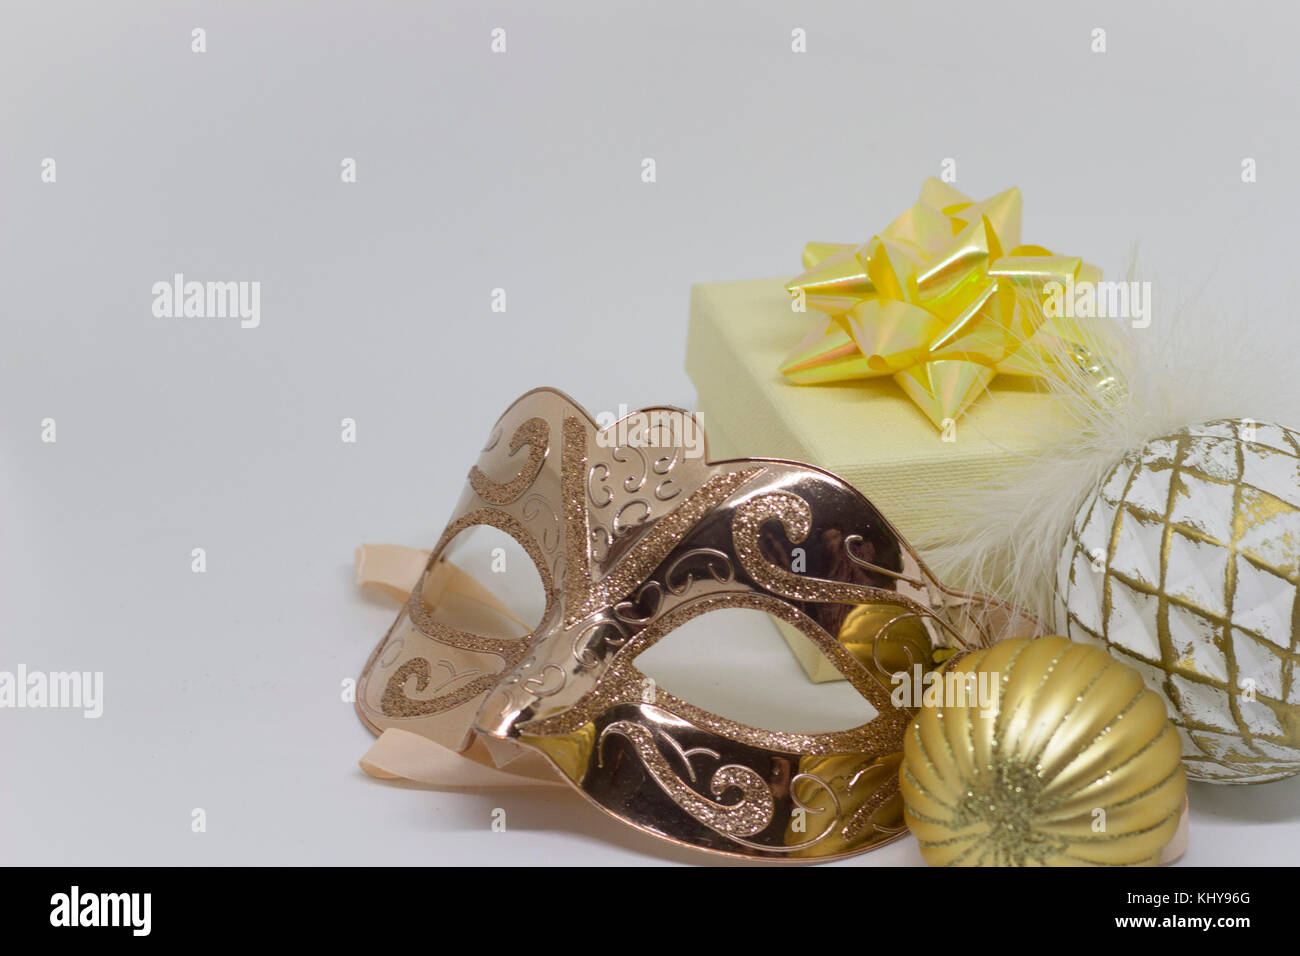 Gold mask and gift box on the table Stock Photo